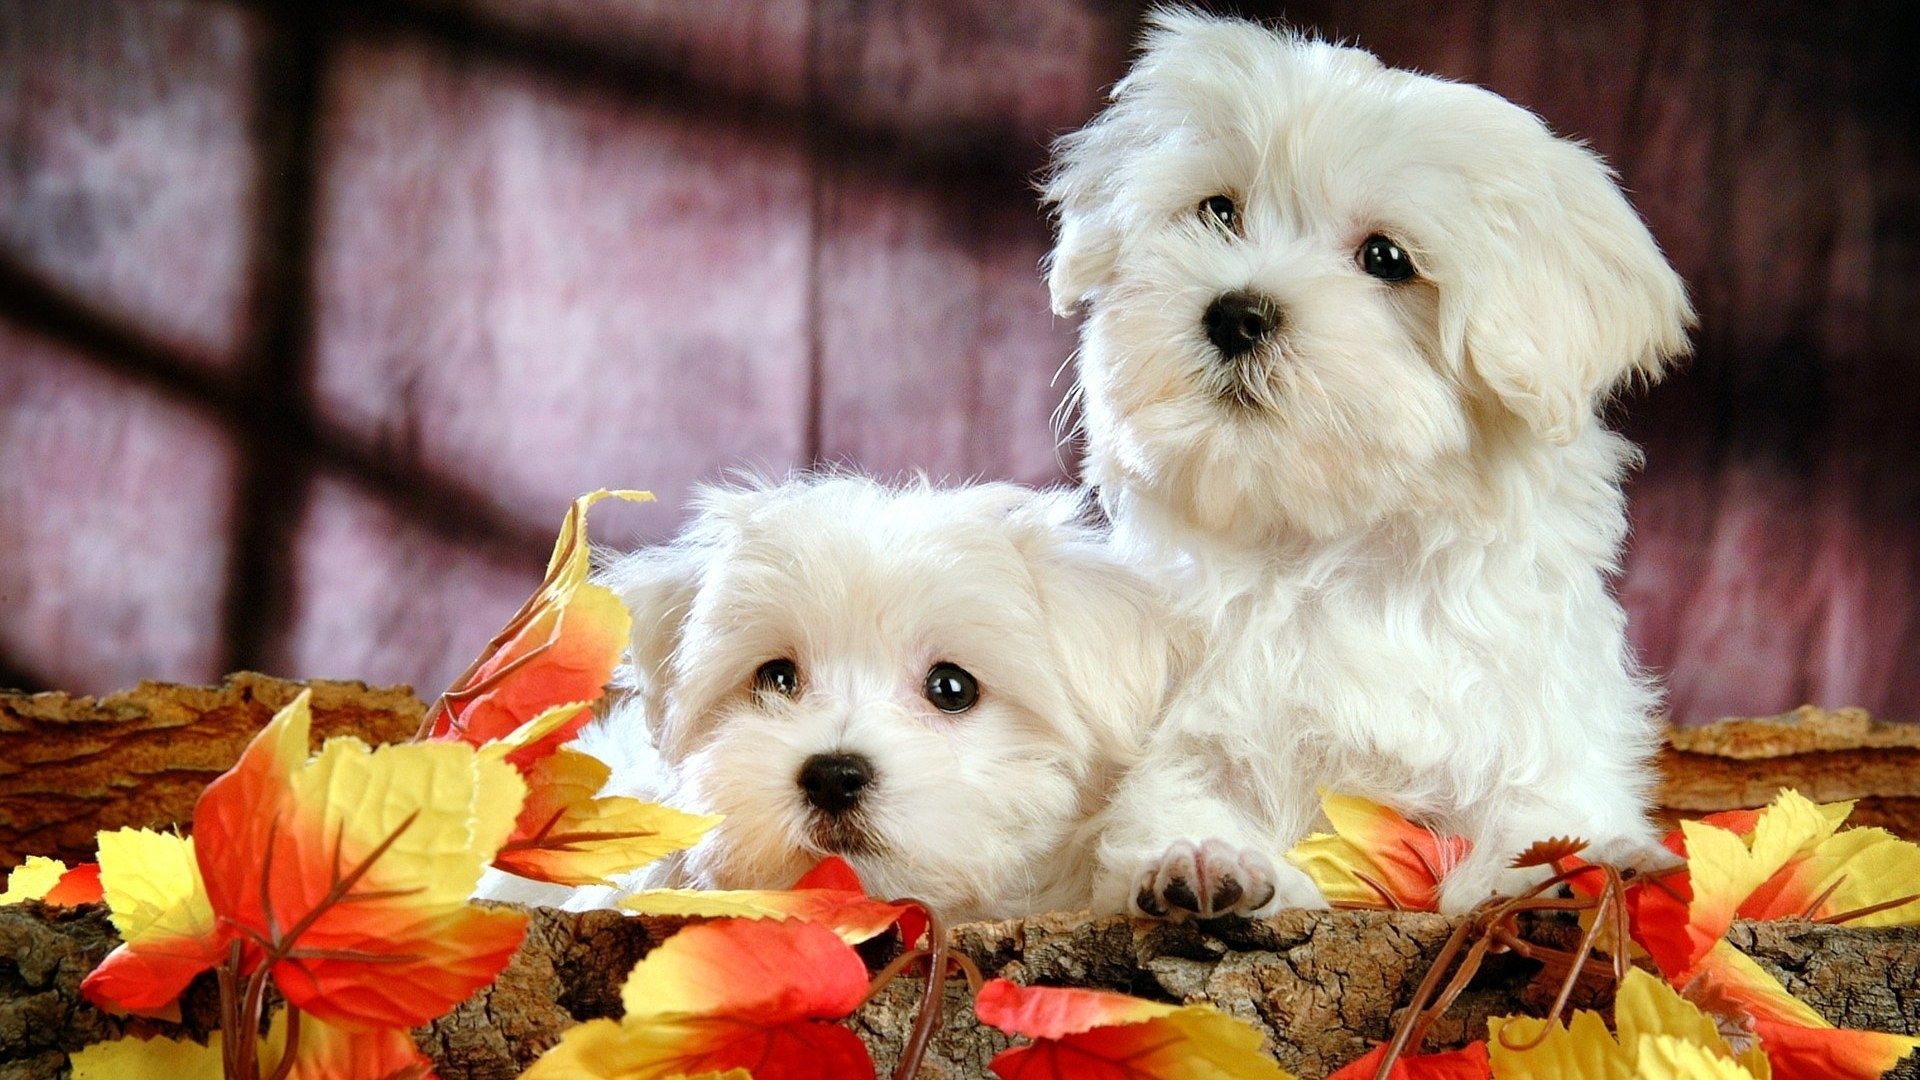 Lovely breeds of Dog Wallpapers - HD Wallpapers 92687